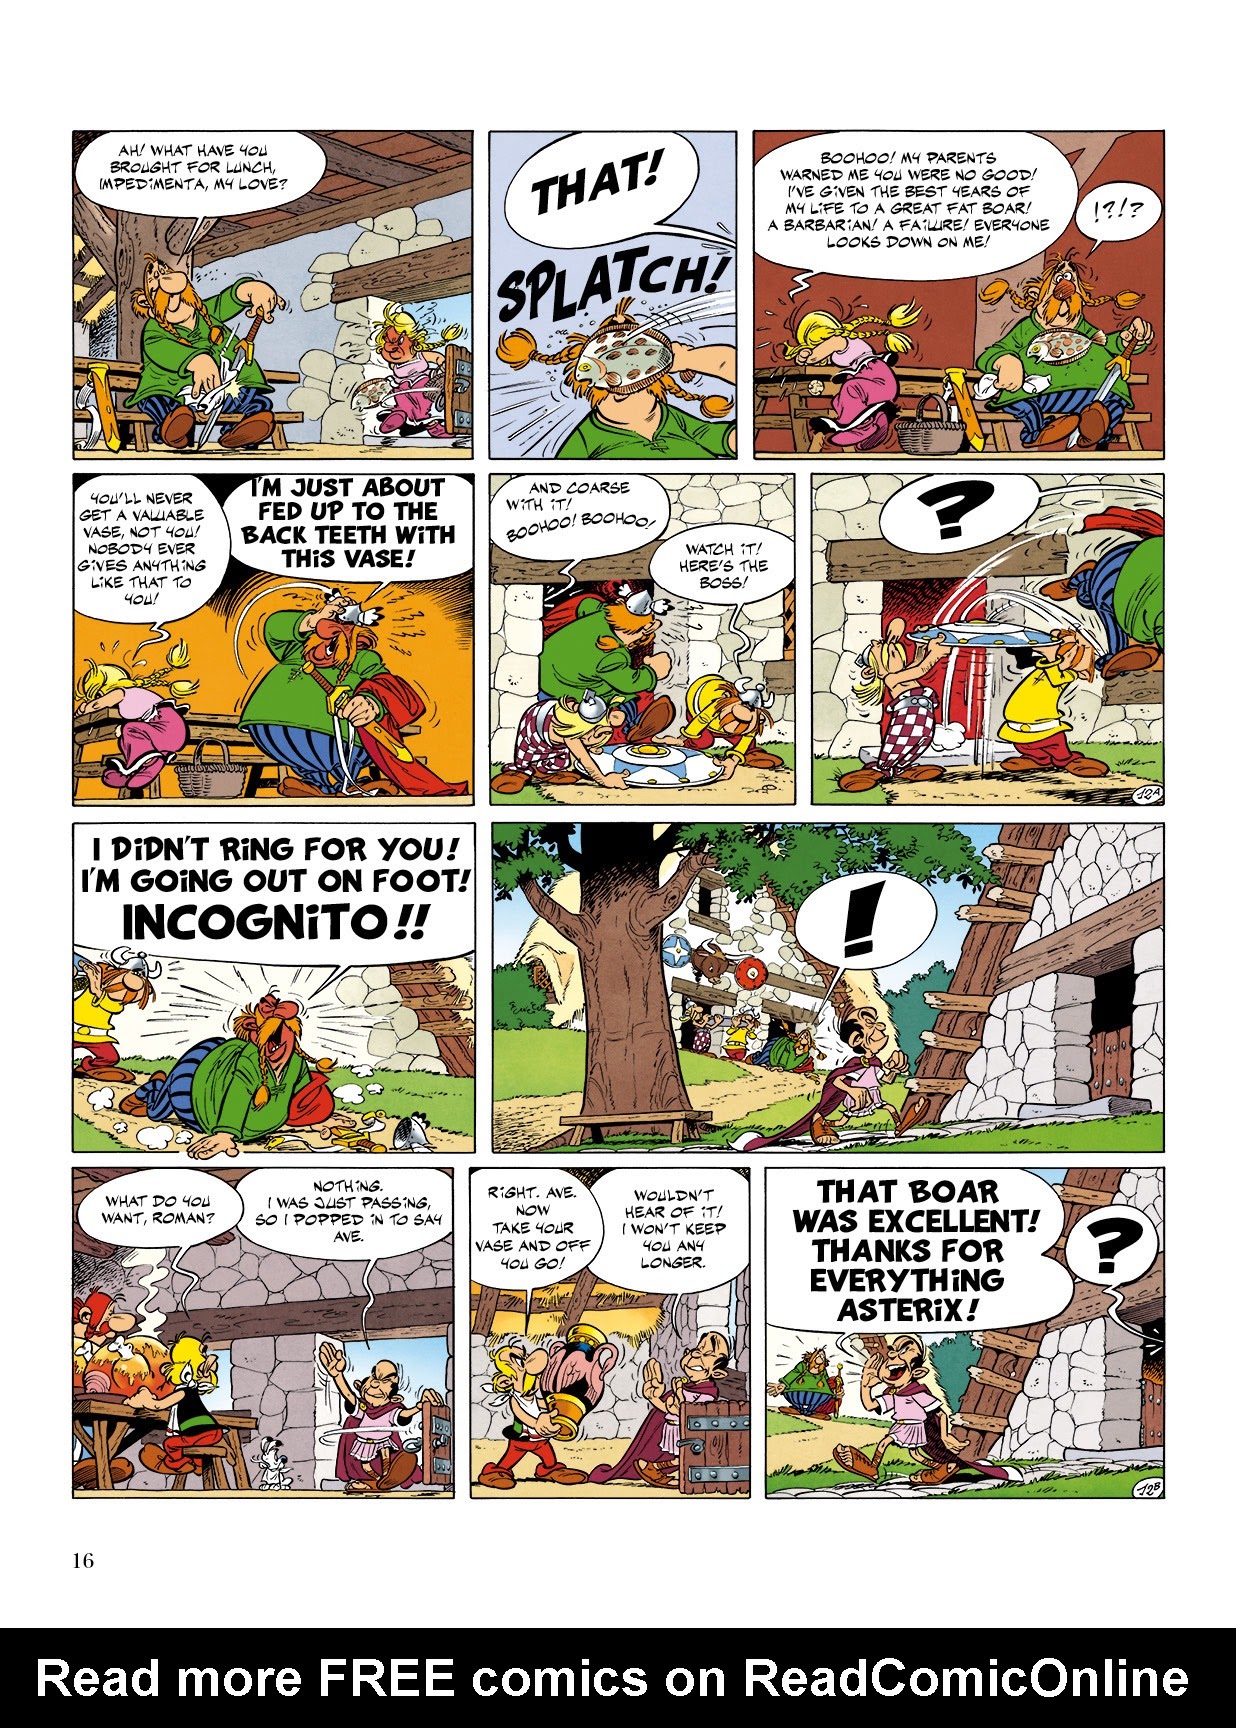 Read online Asterix comic -  Issue #15 - 17